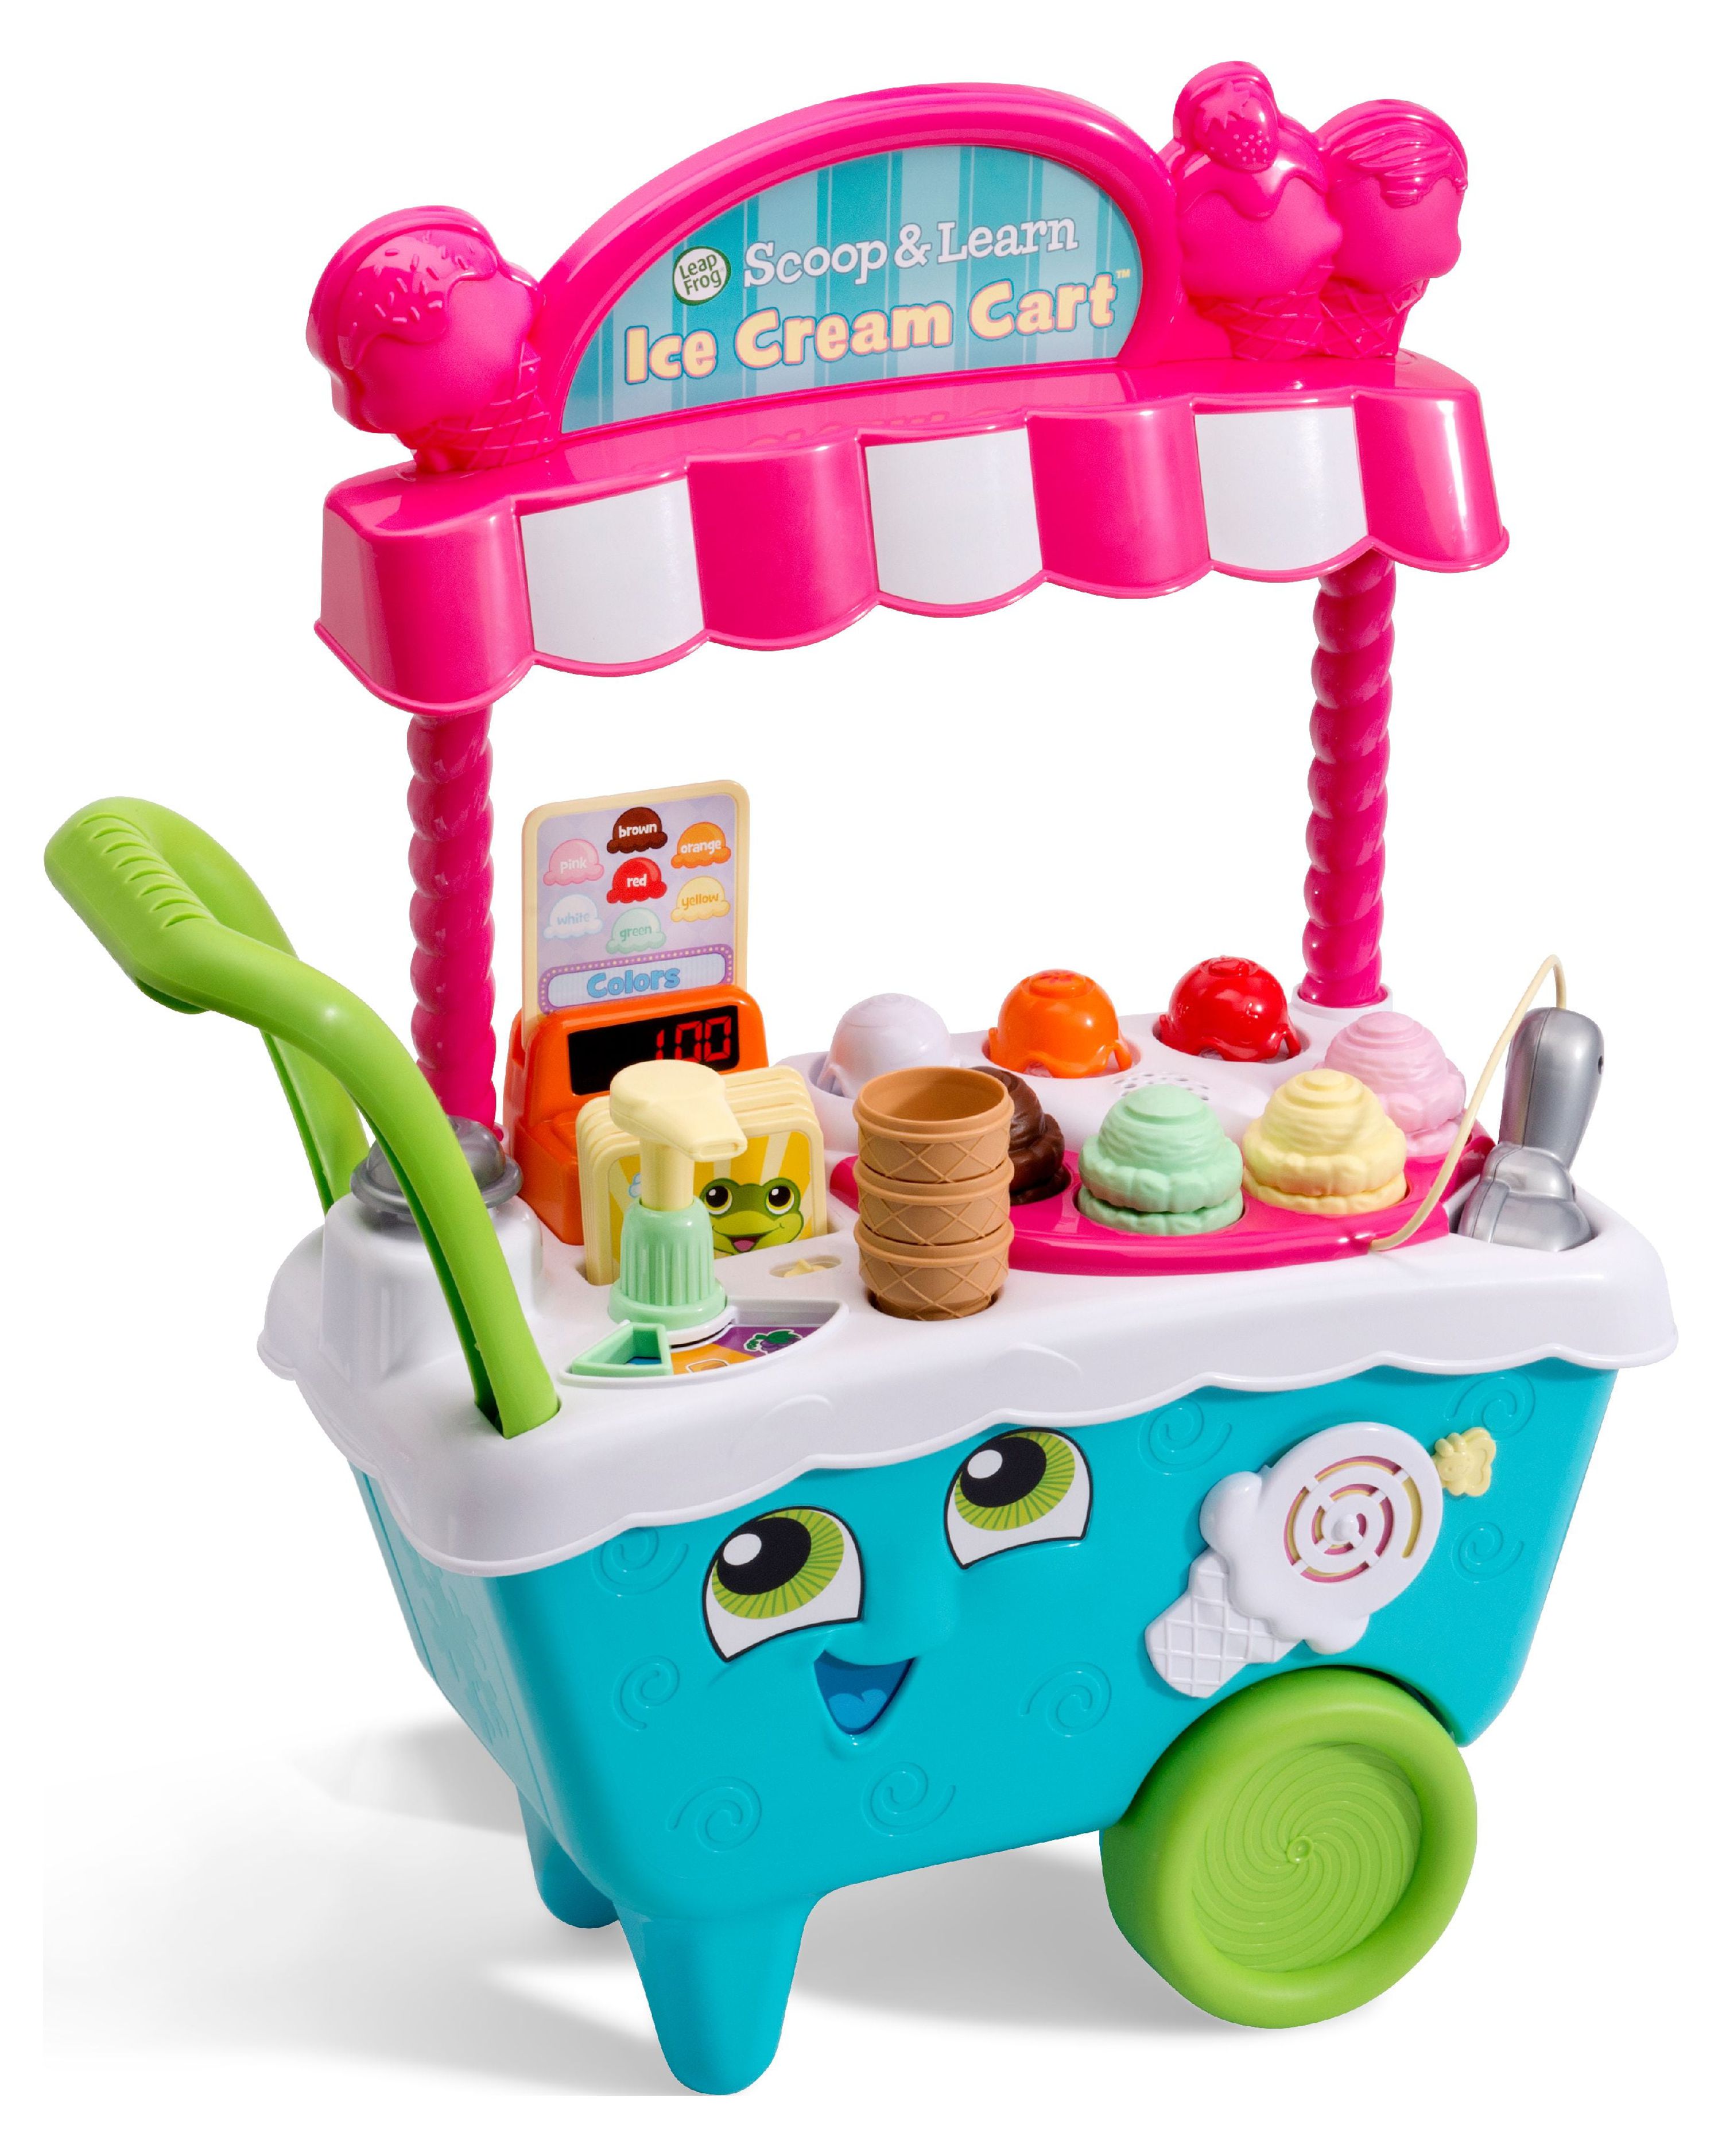 LeapFrog Scoop and Learn Ice Cream Cart, Multi-Color Play Kitchen Toy for Kids - image 4 of 20